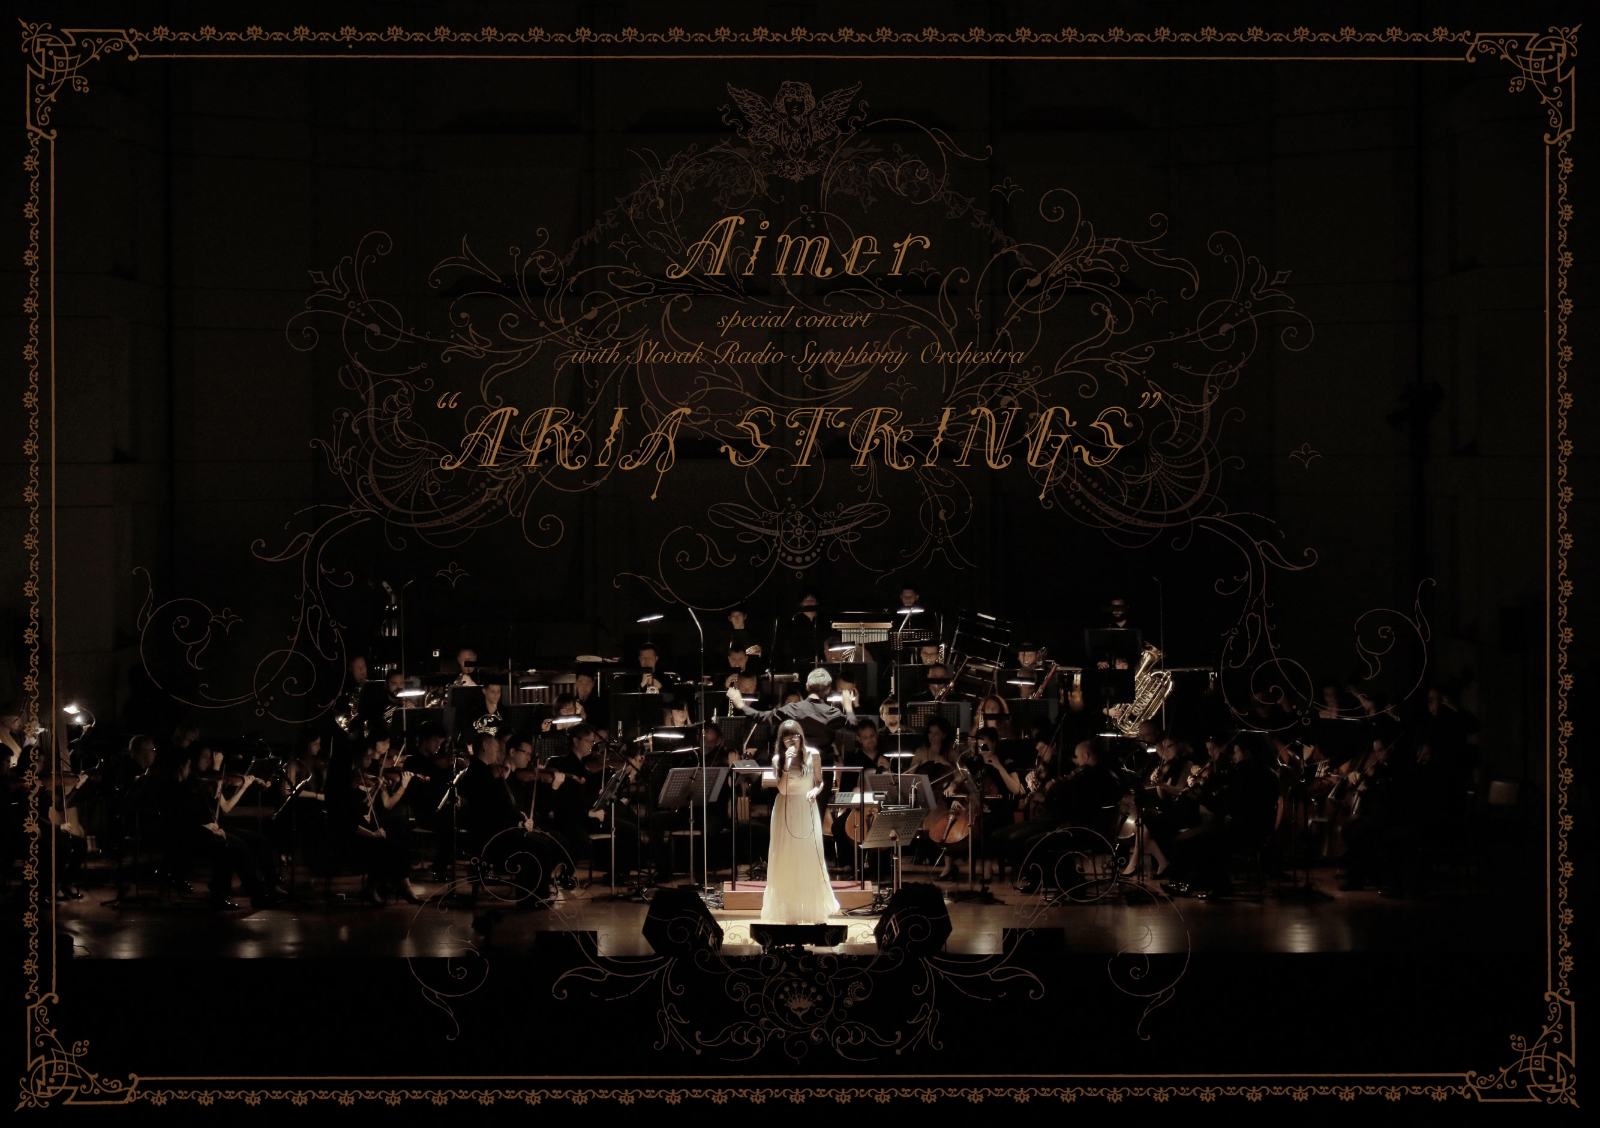 Aimer special concert with スロヴァキア国立放送交響楽団 “ARIA STRINGS”(初回生産限定盤)画像